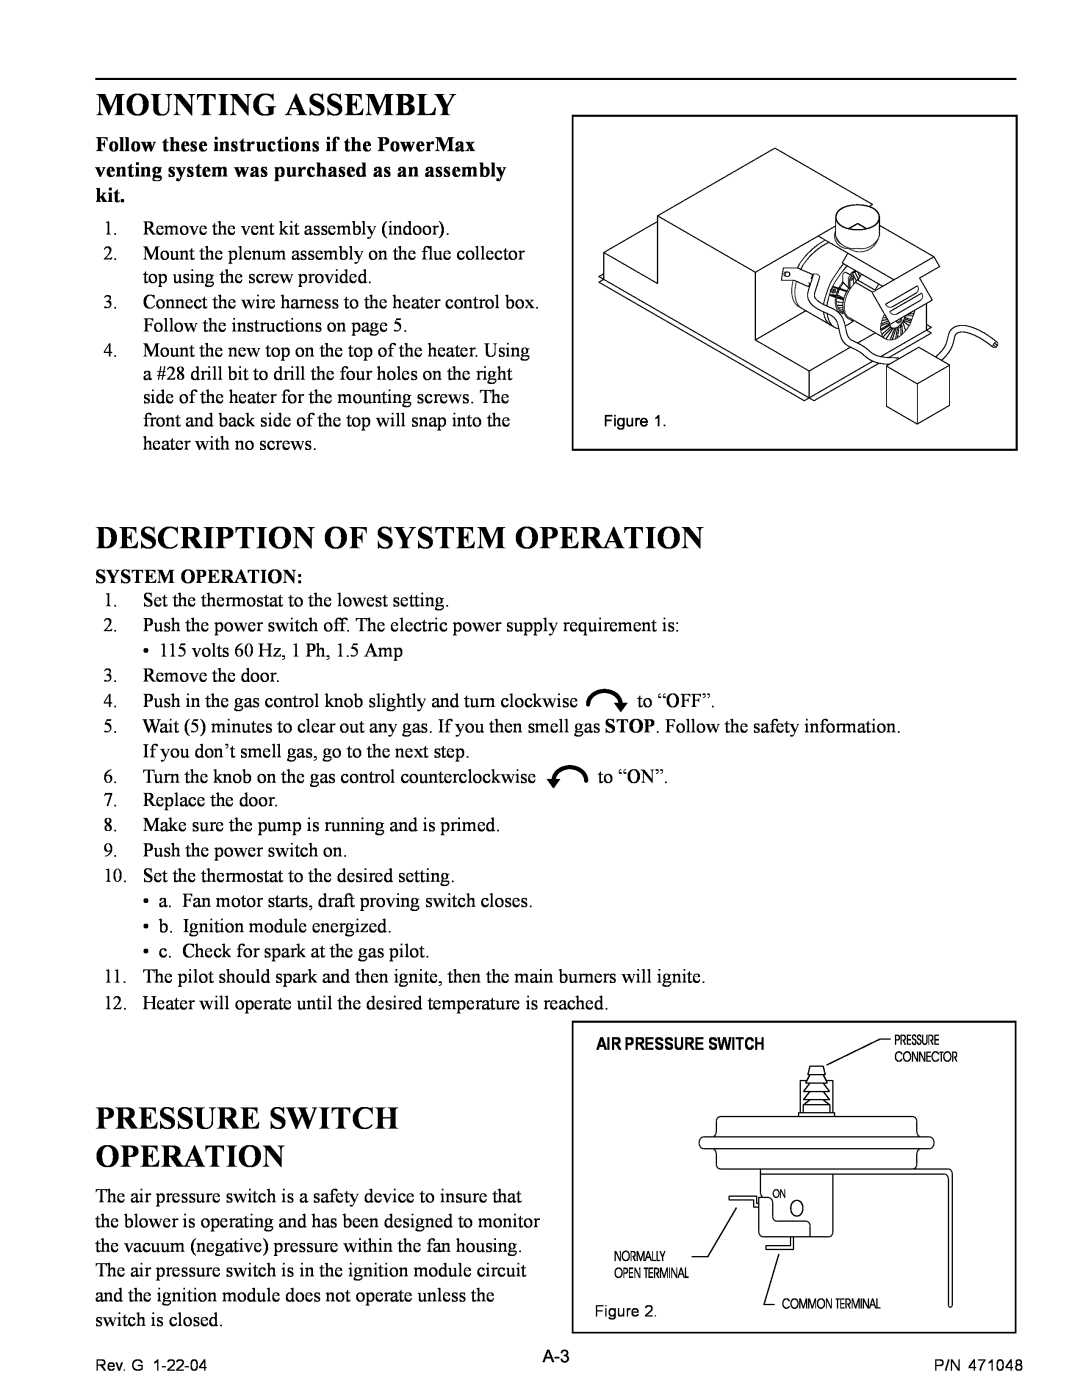 Pentair 100 installation manual Mounting Assembly, Description Of System Operation, Pressure Switch Operation 